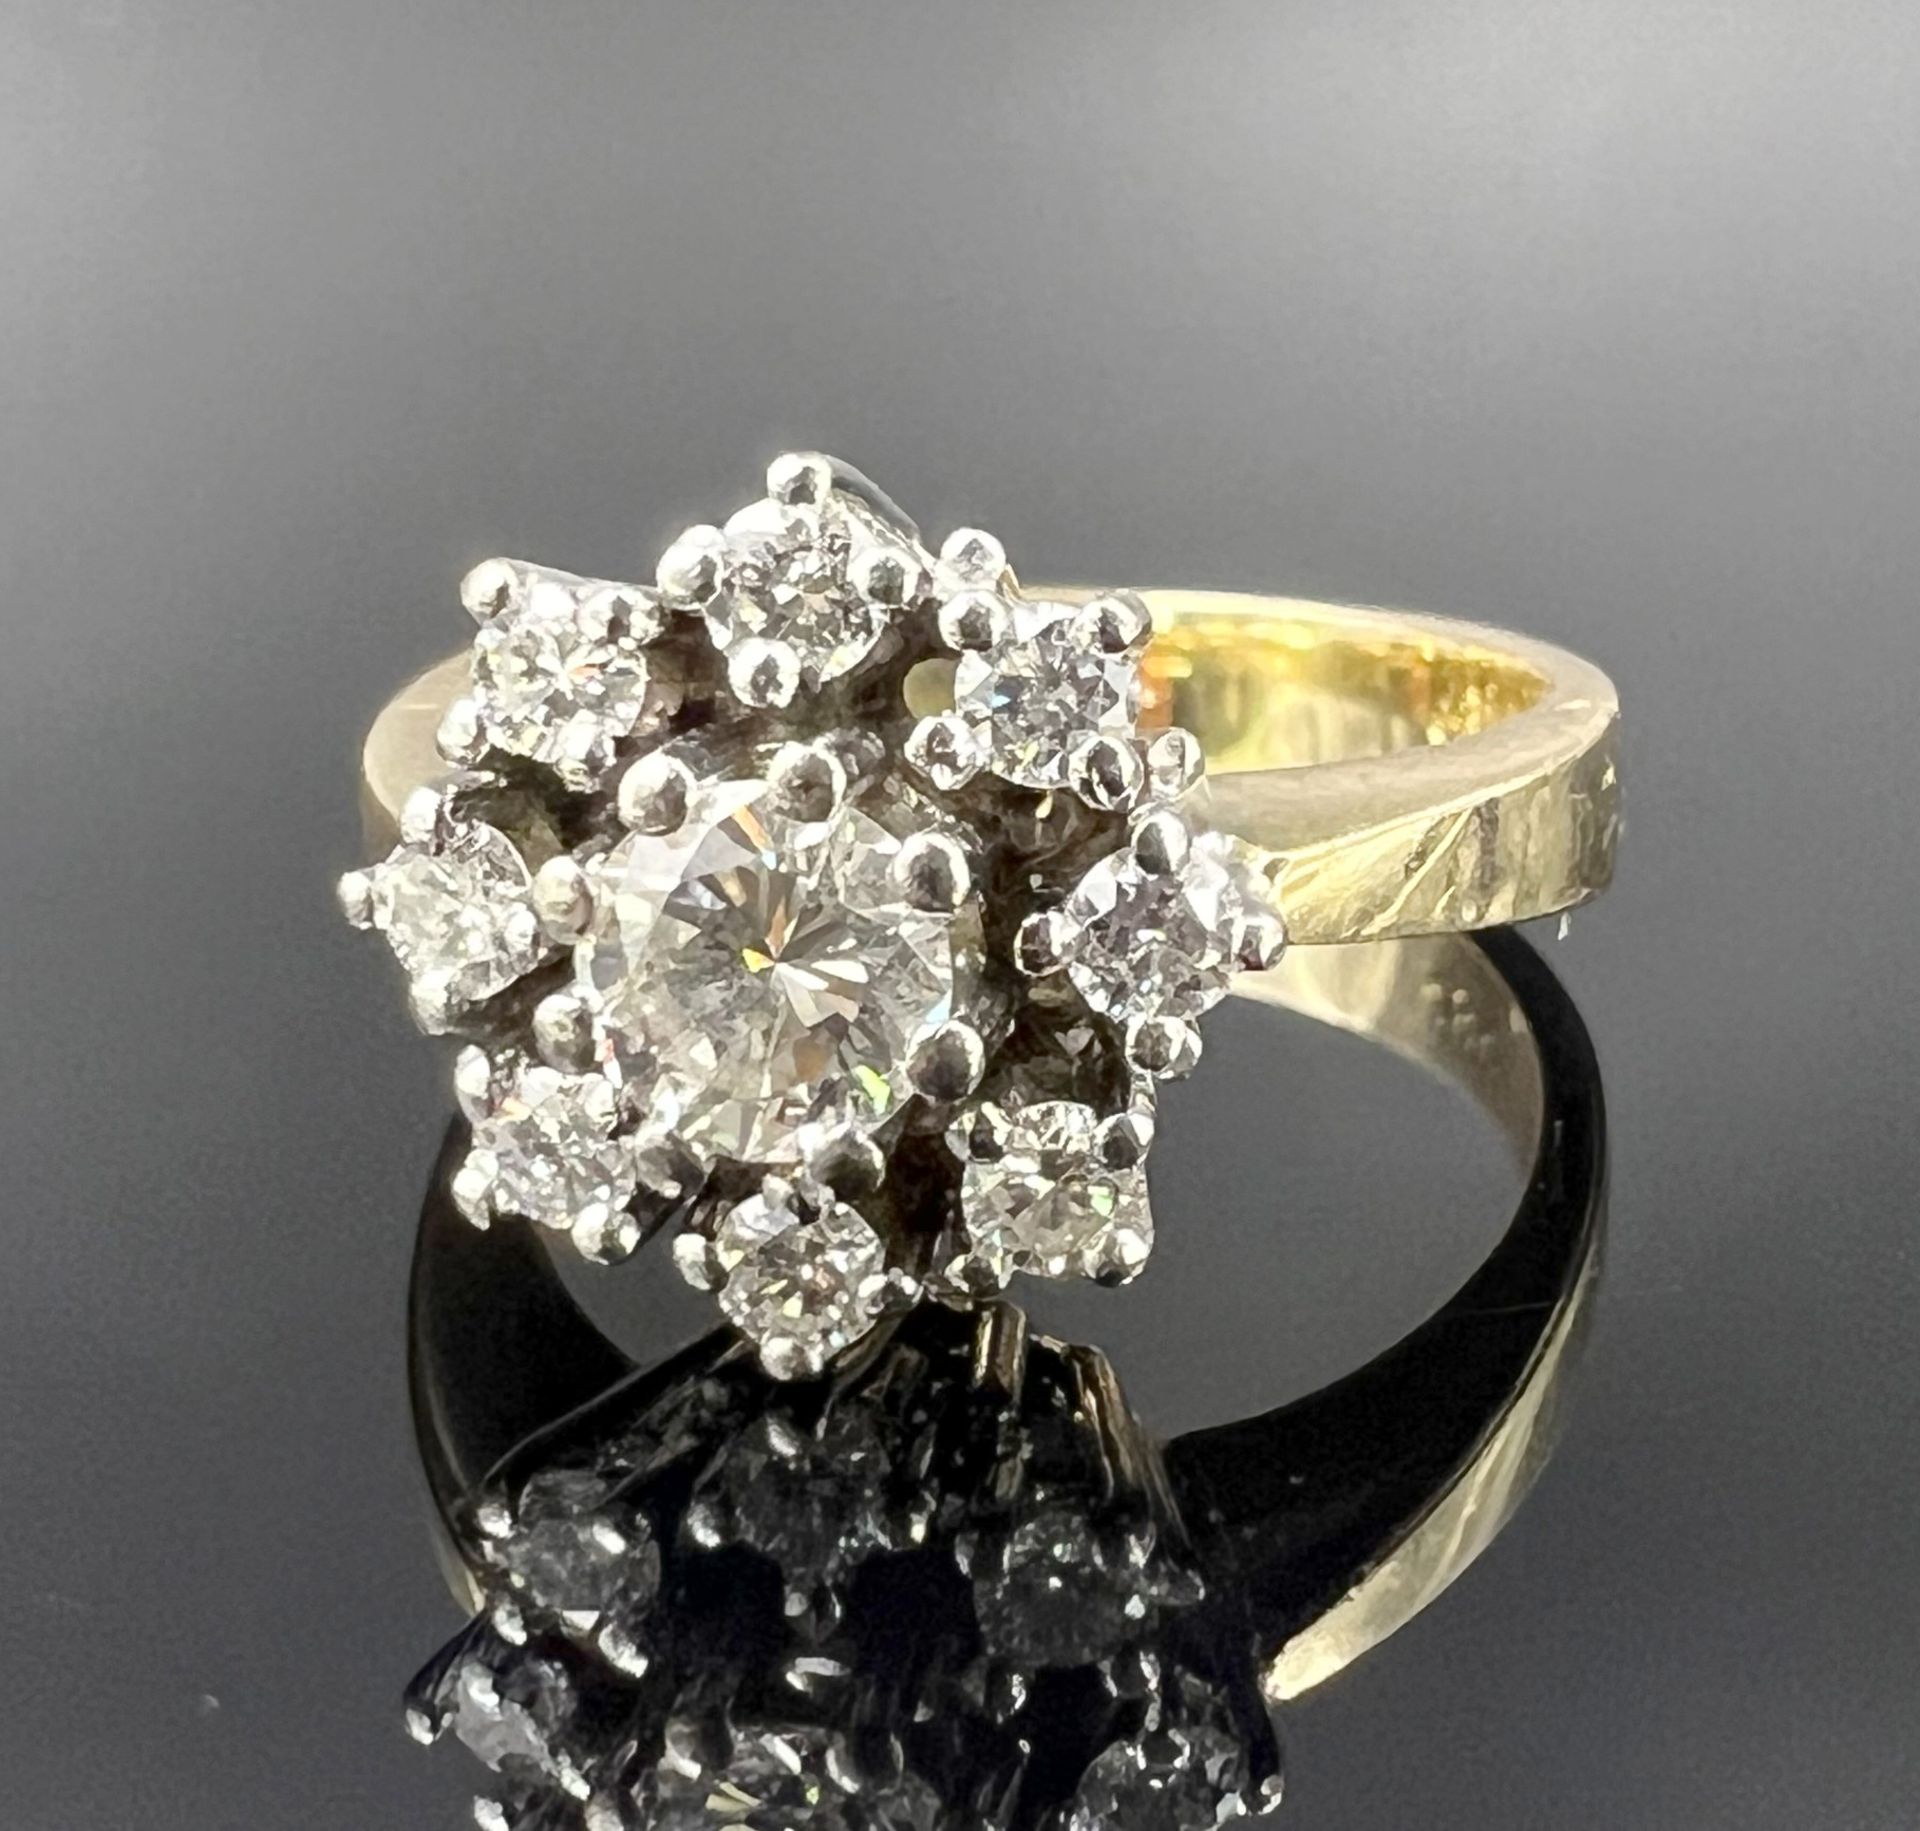 Ladies' ring in the shape of a flower. 585 yellow gold with diamonds.